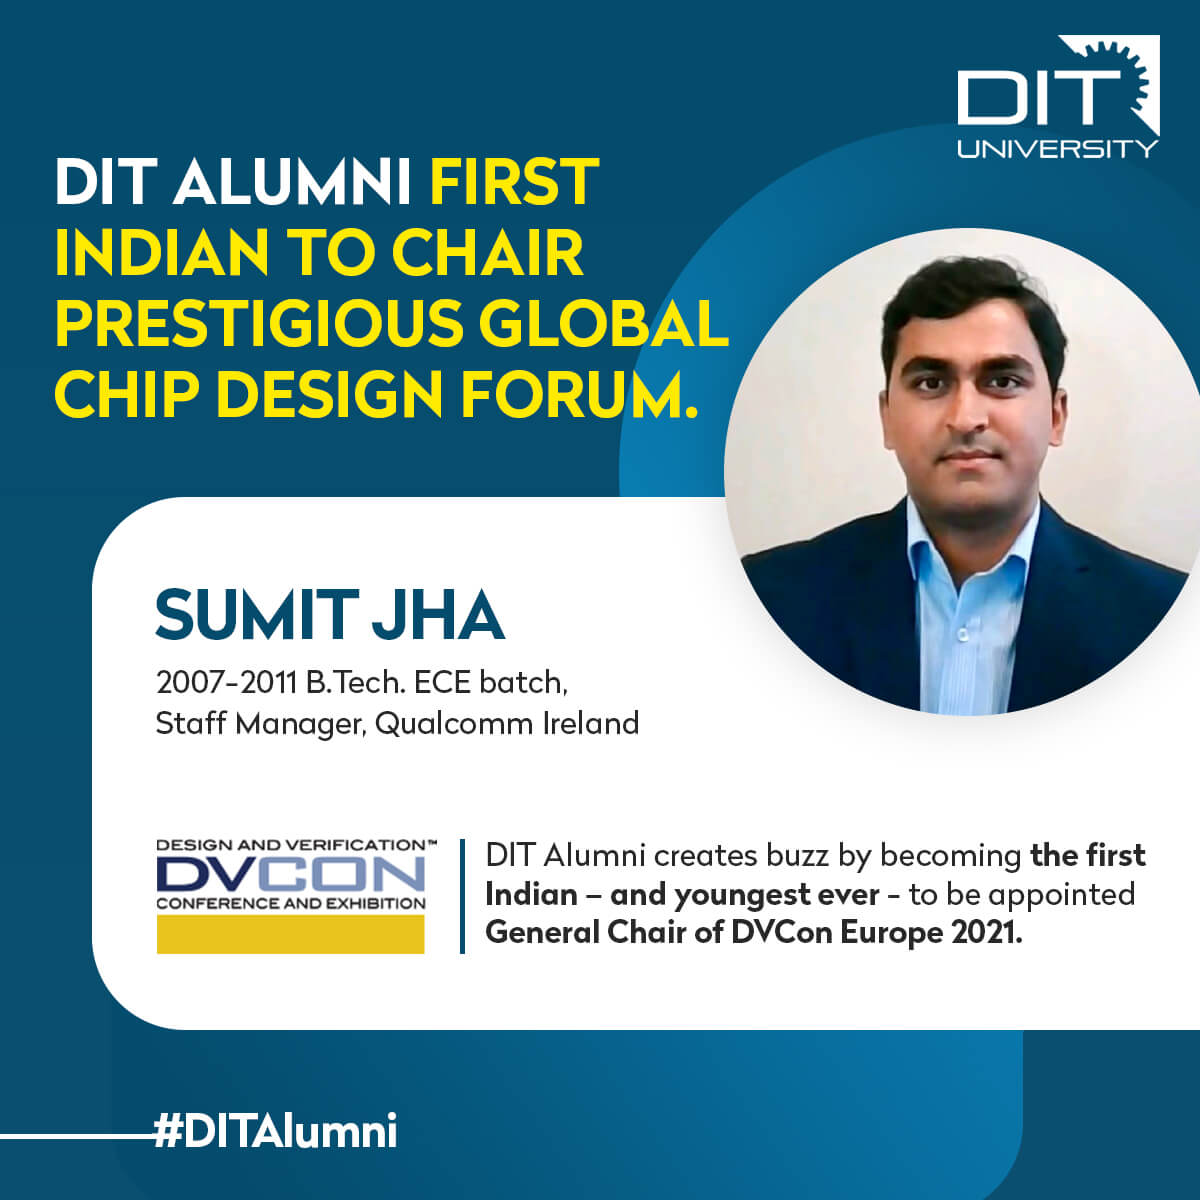 DIT Alumni First Indian to Chair Prestigious Global Chip Design Forum